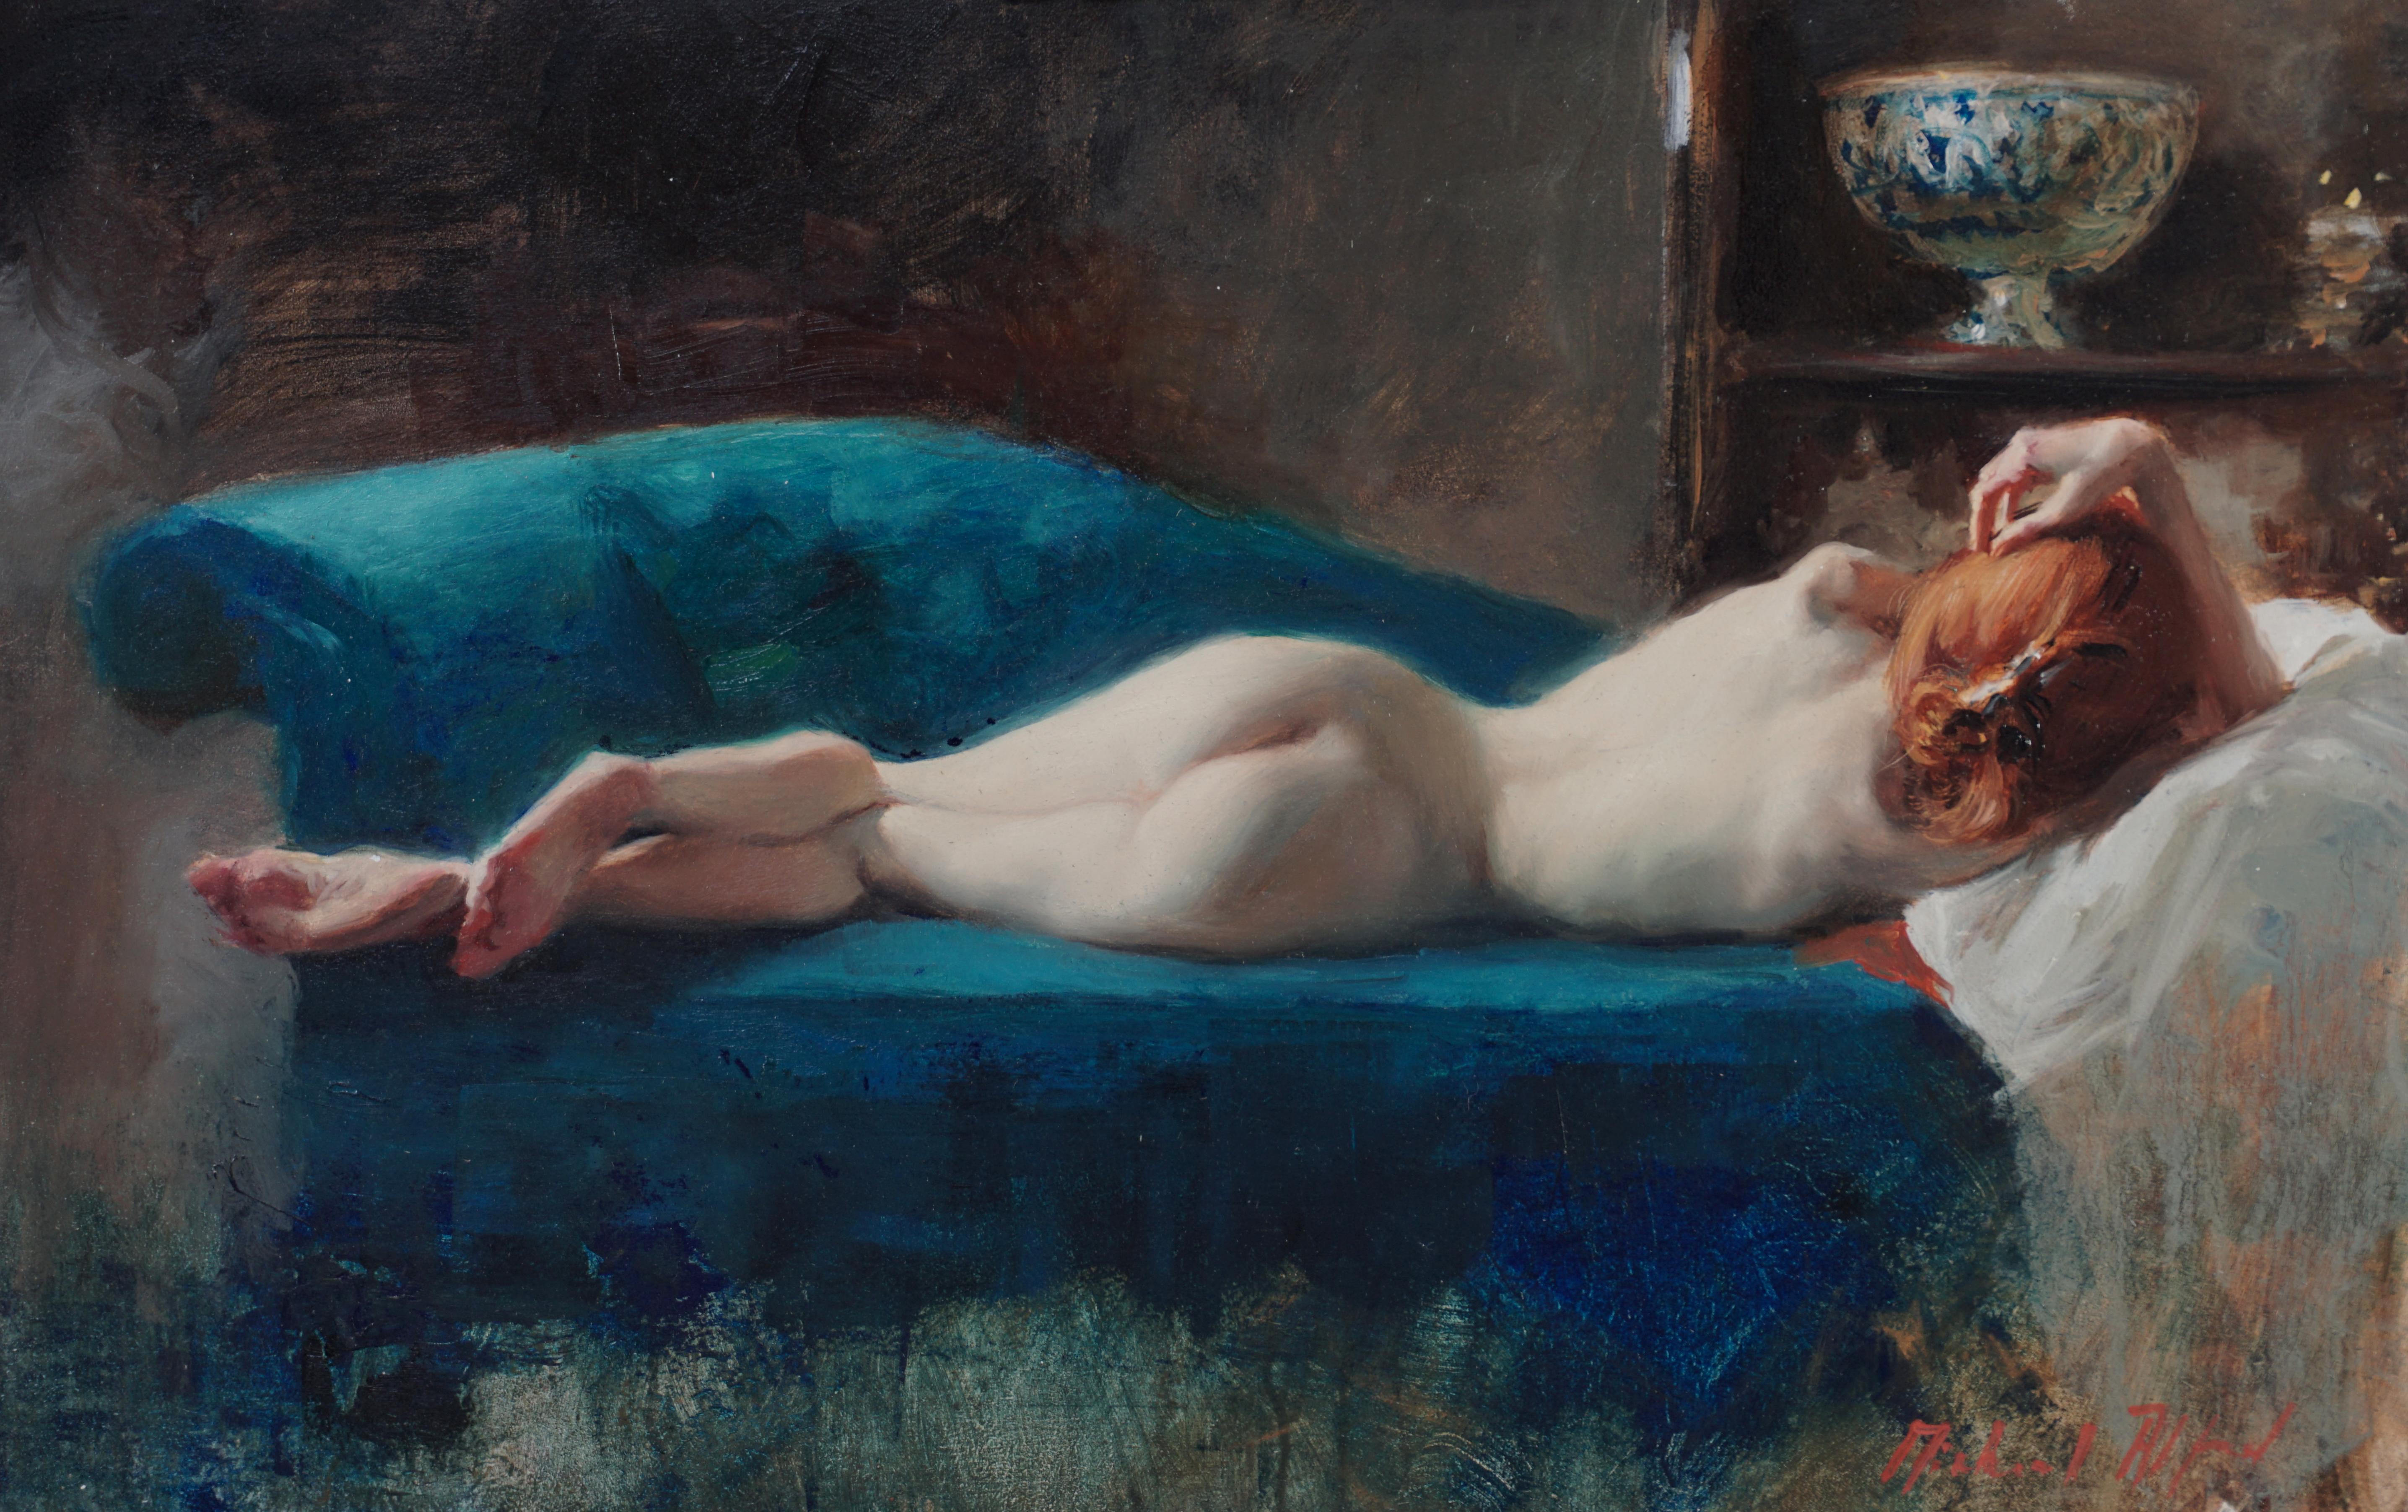 Michael Alford Figurative Painting - Sleeping Nude-original impressionist nude figurative painting-contemporary Art